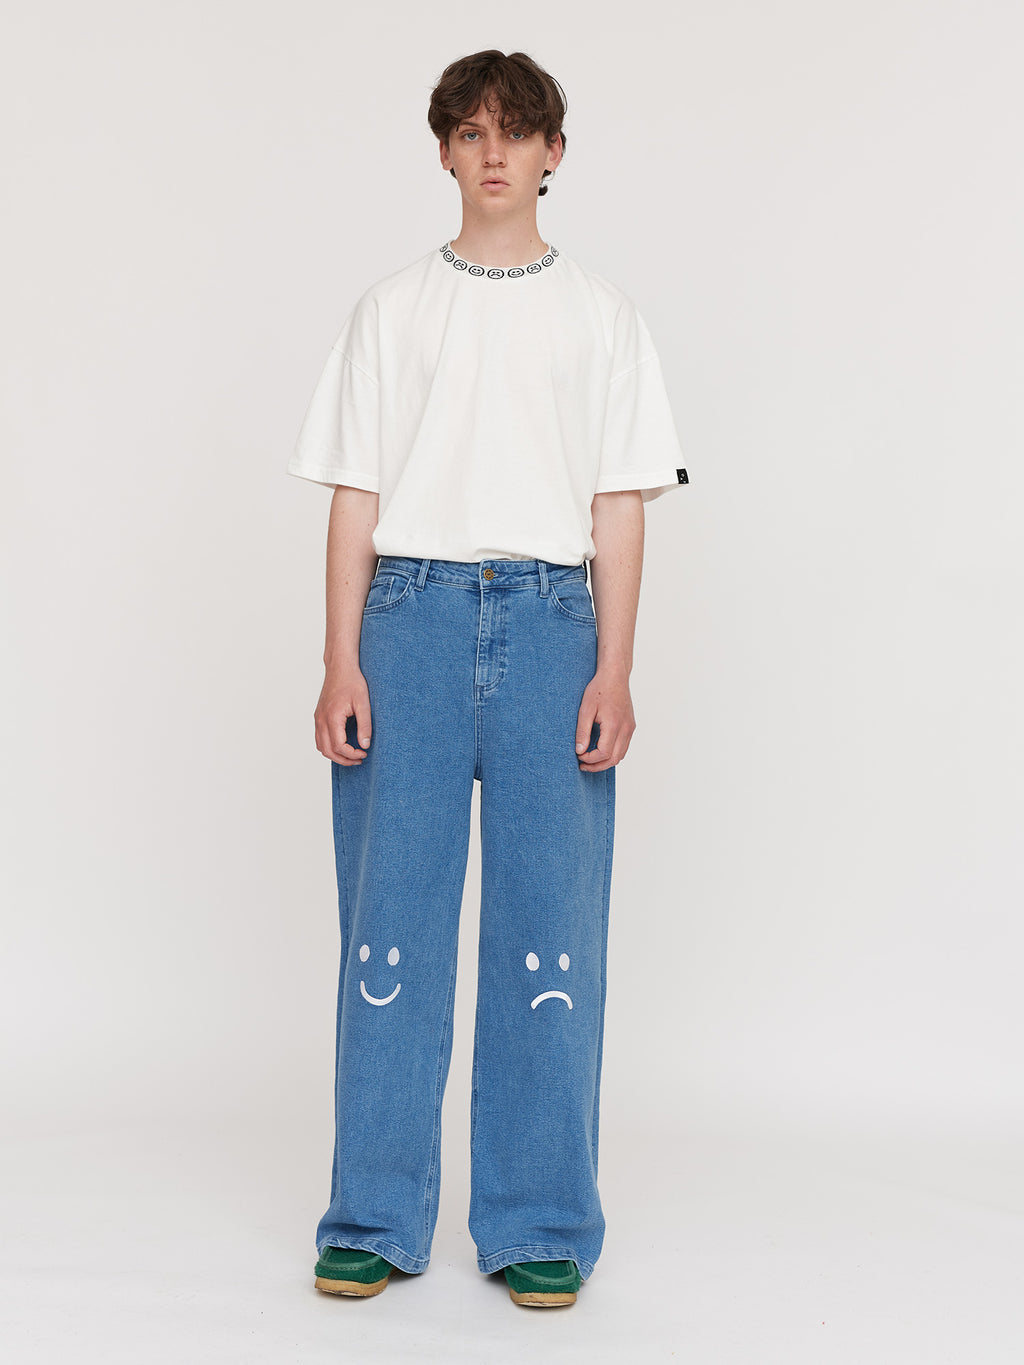 collection-men-landing, collection-men-new-in-1, collection-mens-trousers,collection-happy-sad